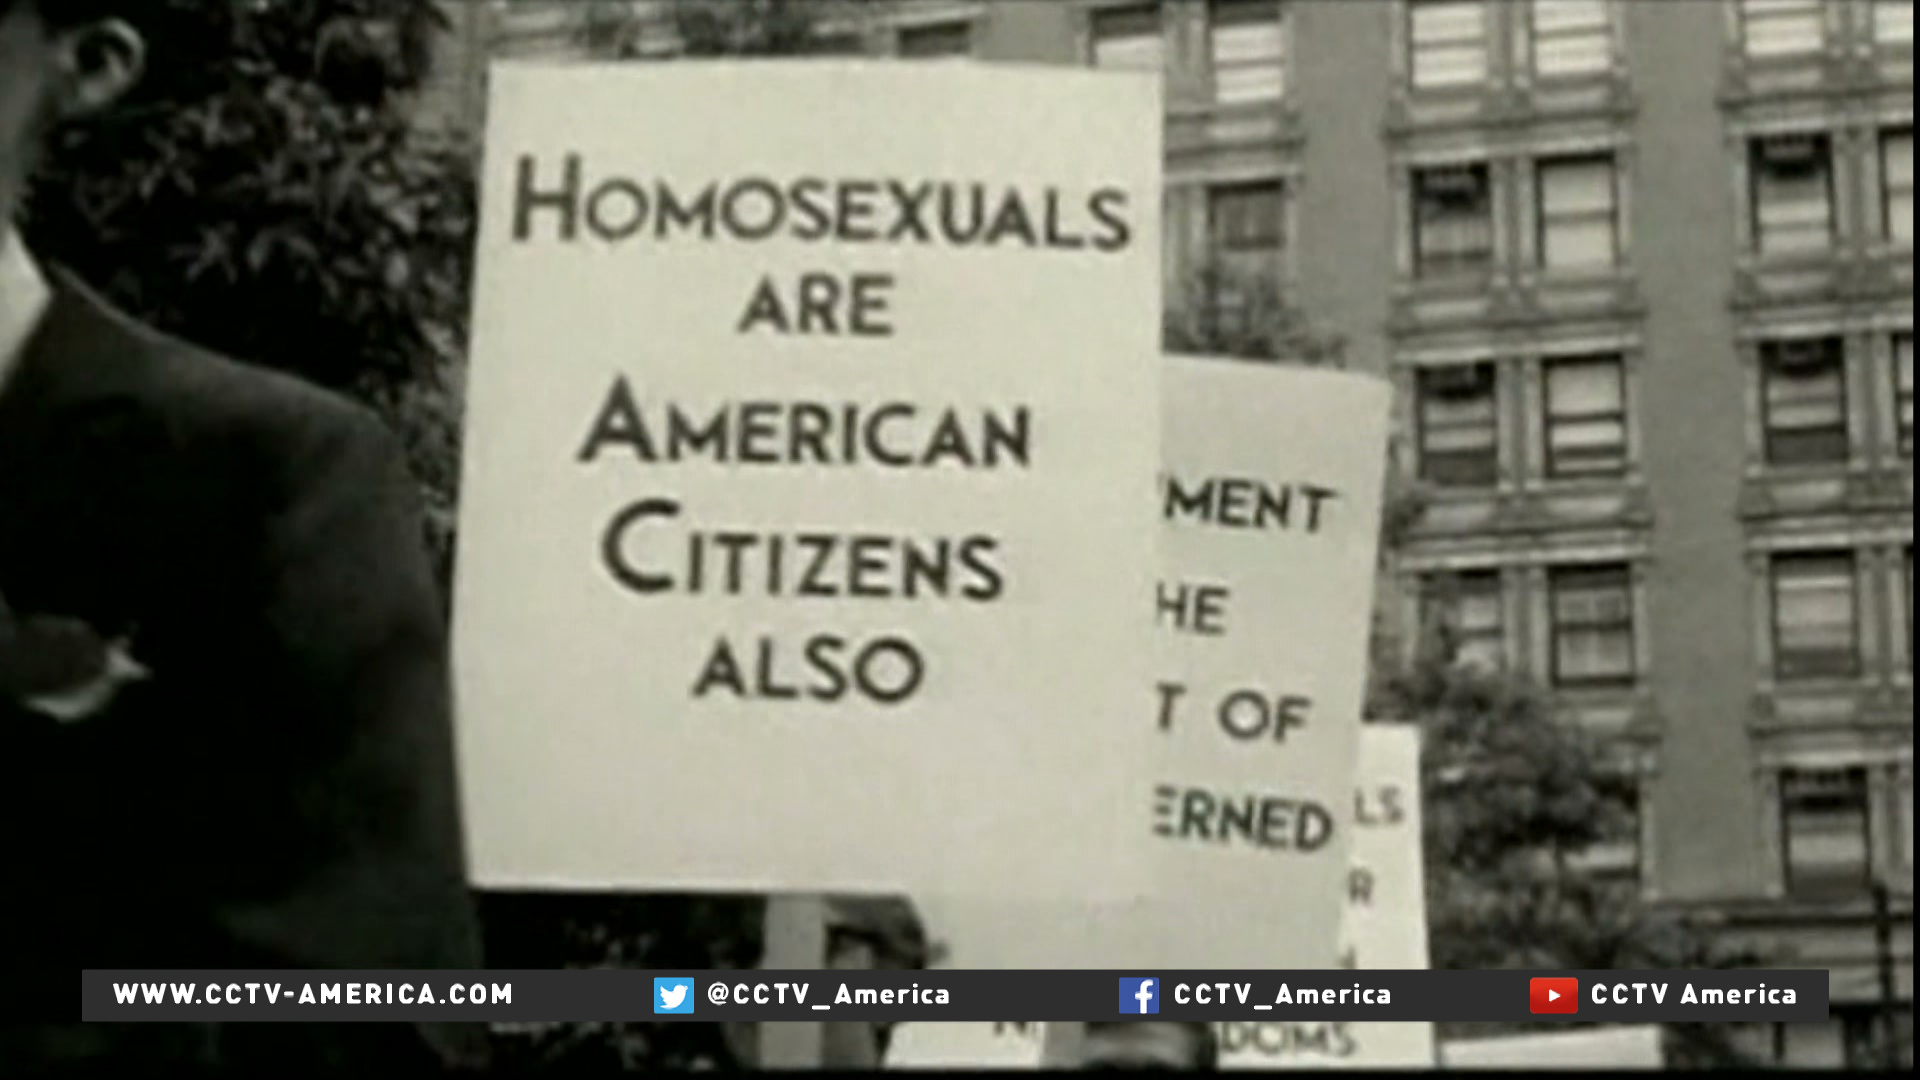 History of hate crimes against the LGBT community